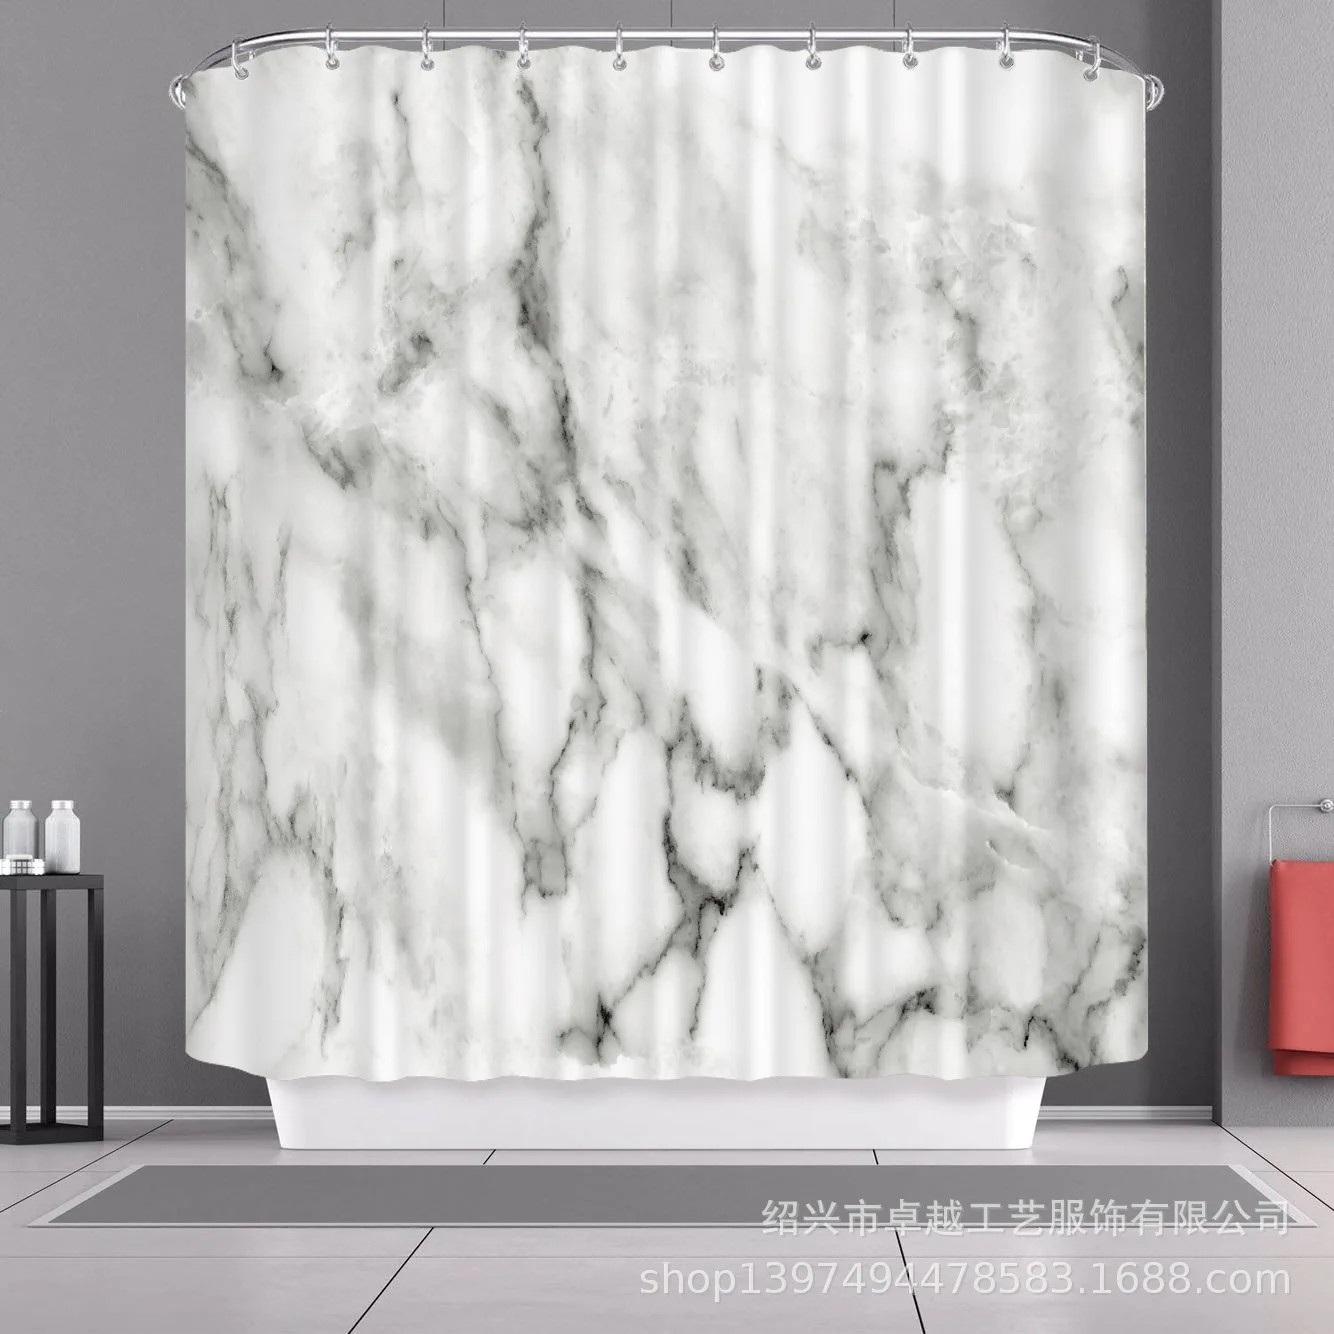 

Waterproof Polyester Shower Curtain Anti-mildew Printing Marbling Opaque Curtains for Bath Room Cortina Bathroom Decor BE50SD